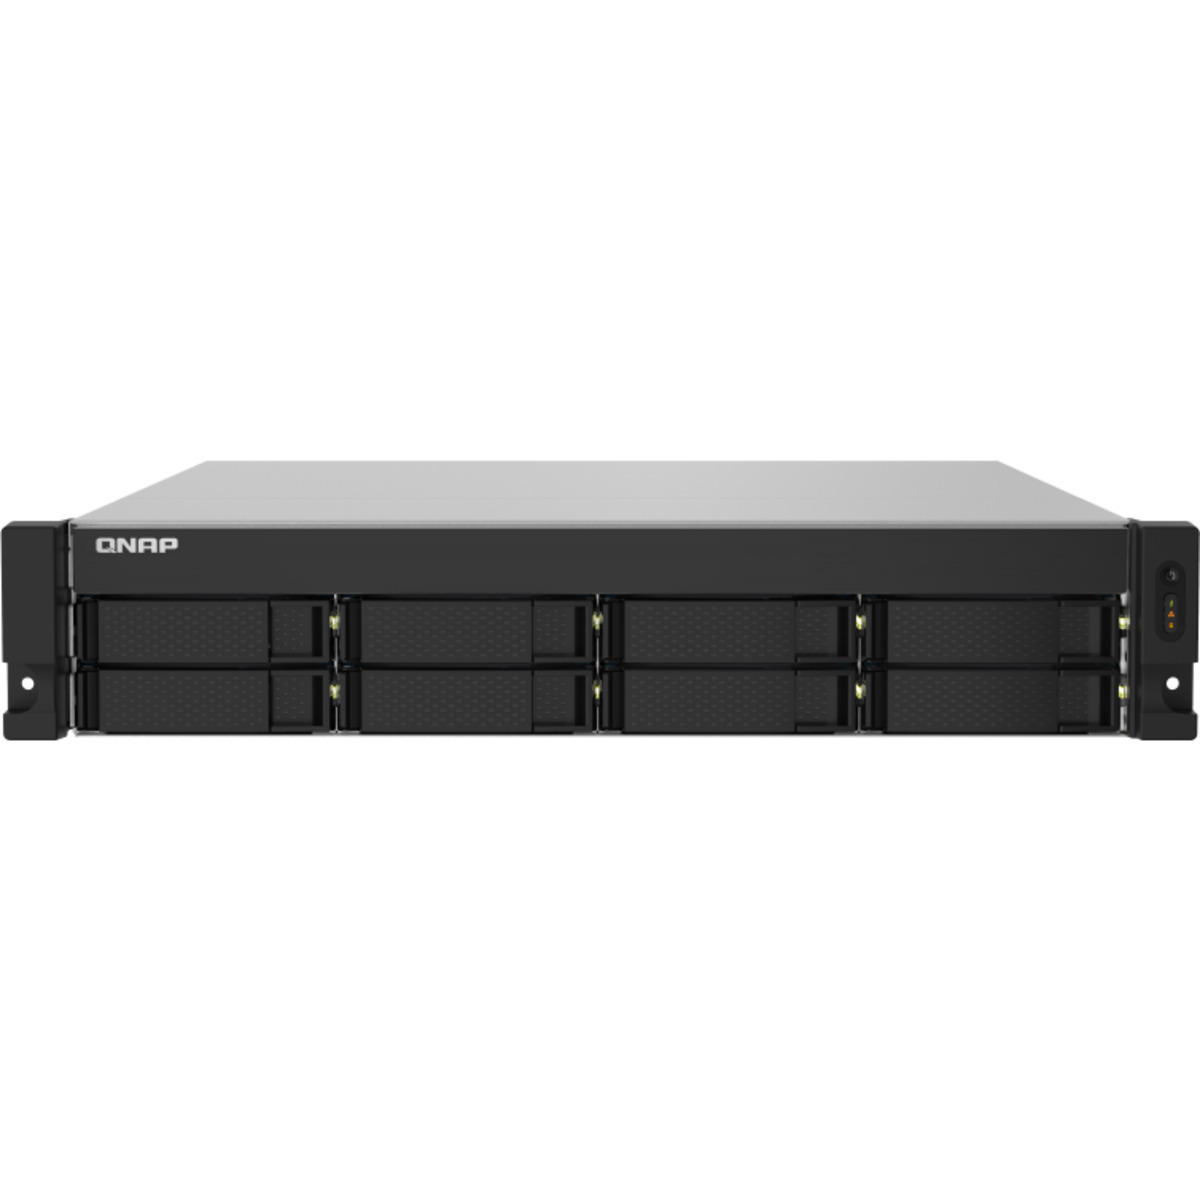 QNAP TS-832PXU-RP 12tb 8-Bay RackMount Personal / Basic Home / Small Office NAS - Network Attached Storage Device 6x2tb Crucial MX500 CT2000MX500SSD1 2.5 560/510MB/s SATA 6Gb/s SSD CONSUMER Class Drives Installed - Burn-In Tested - FREE RAM UPGRADE TS-832PXU-RP